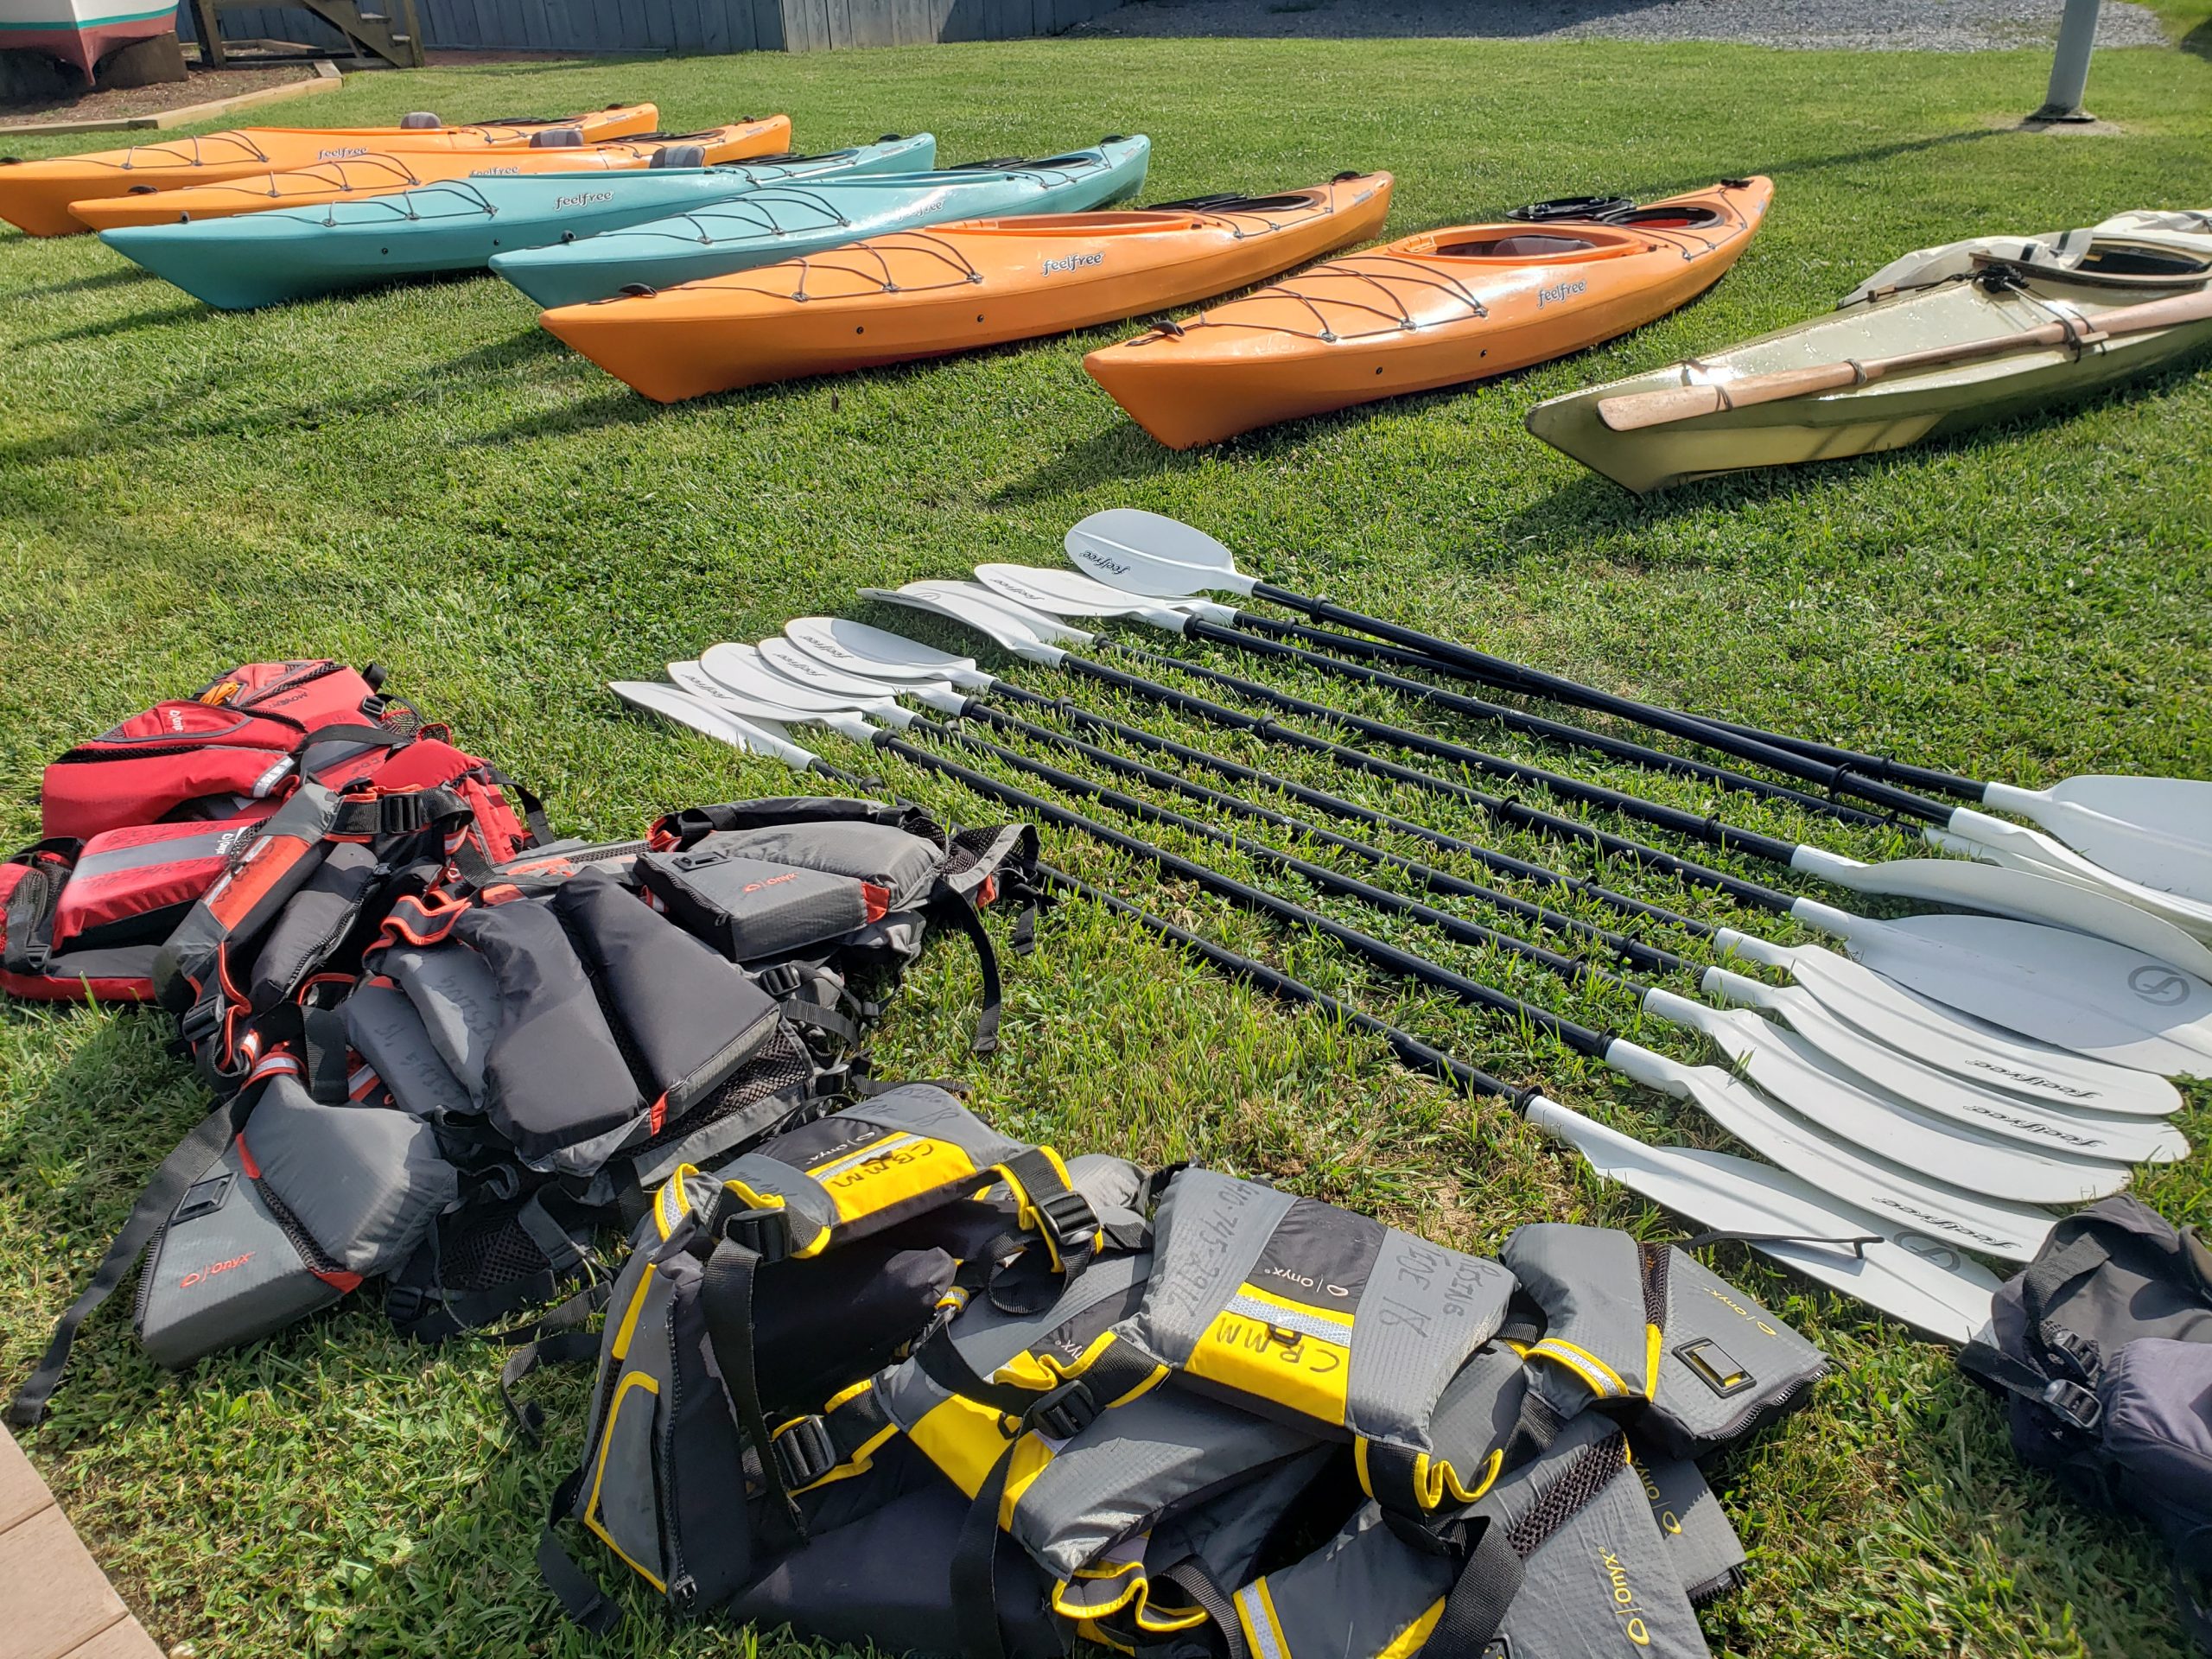 CBMM’s first paddling event of the season is Paddling Gear & Beer Demo Day on May 19 from 5:30-8pm.